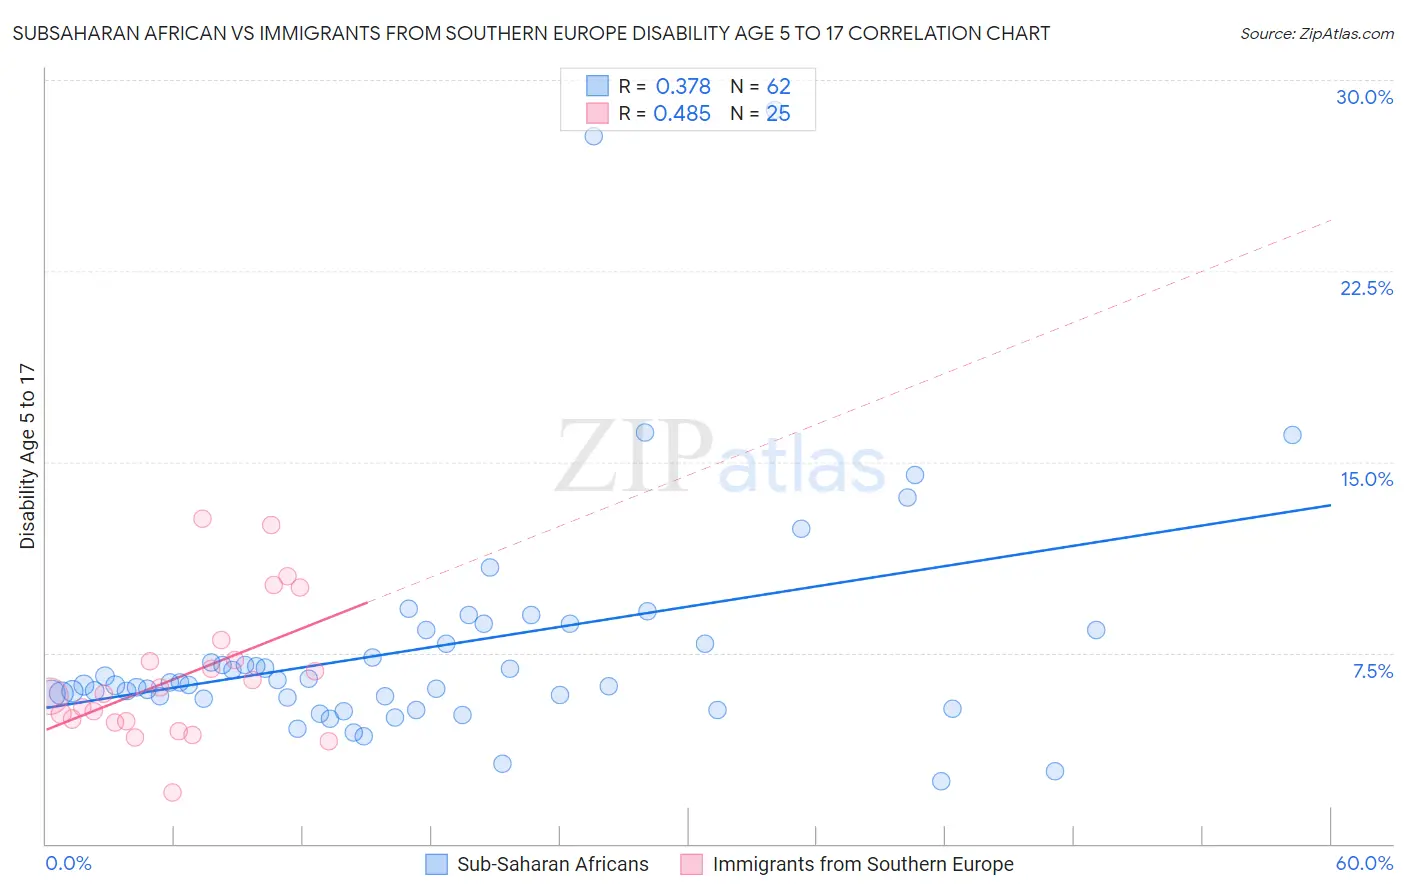 Subsaharan African vs Immigrants from Southern Europe Disability Age 5 to 17